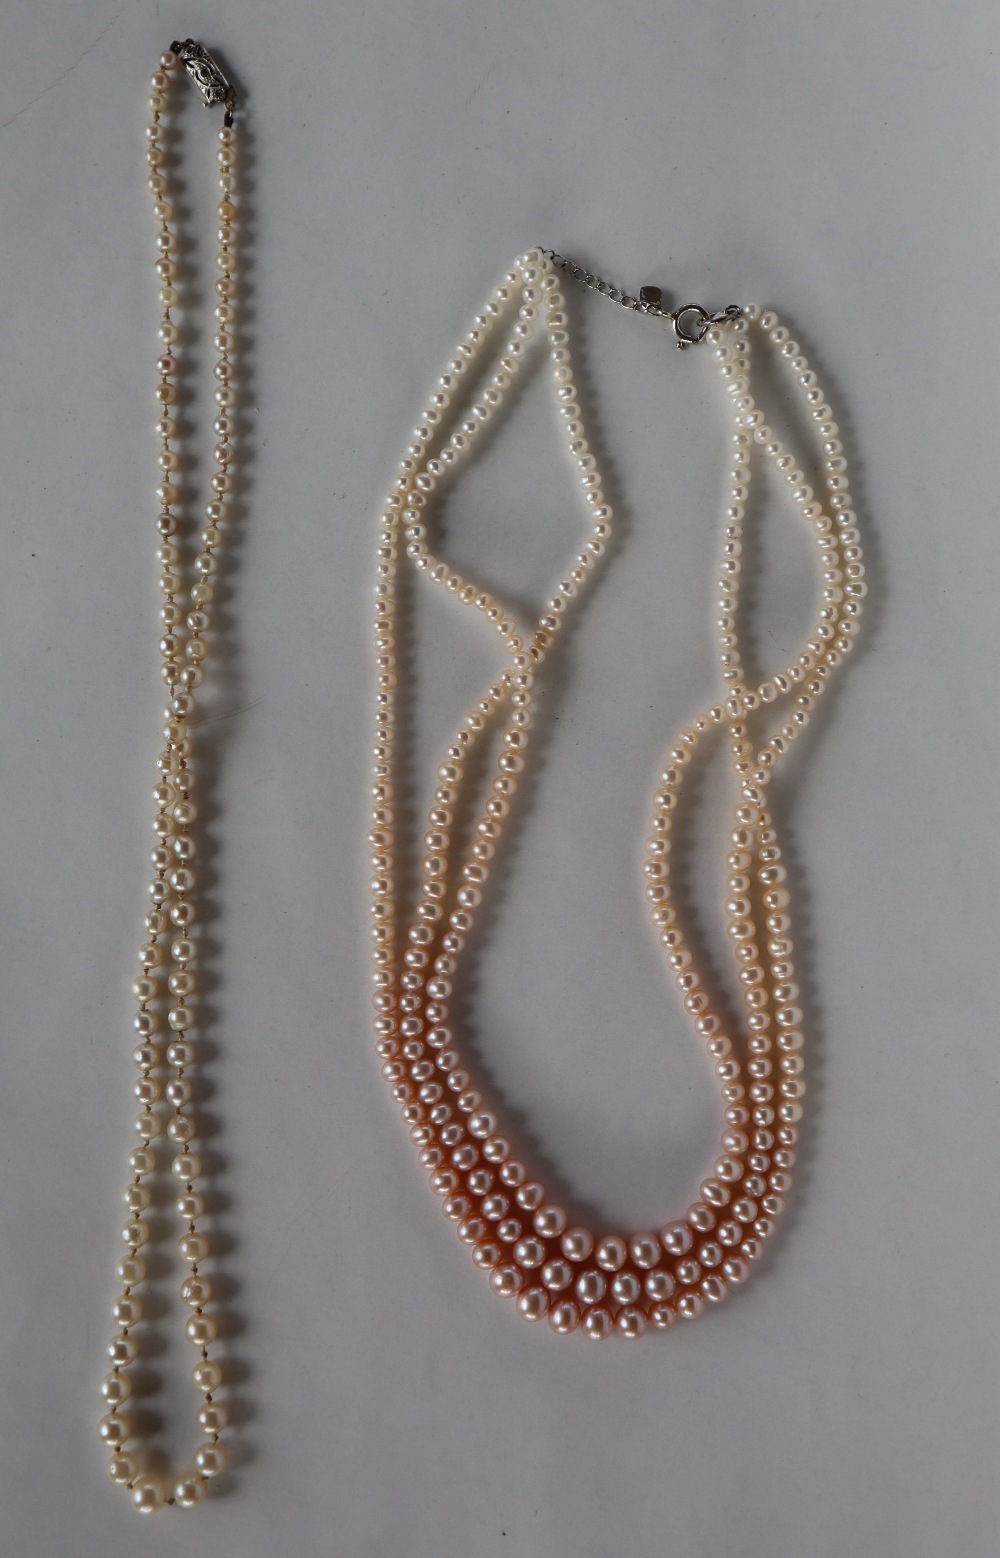 A pearl necklace with graduated pearls, ranging from 6mm to 3mm diameter, to a 9ct white gold clasp, - Image 4 of 5